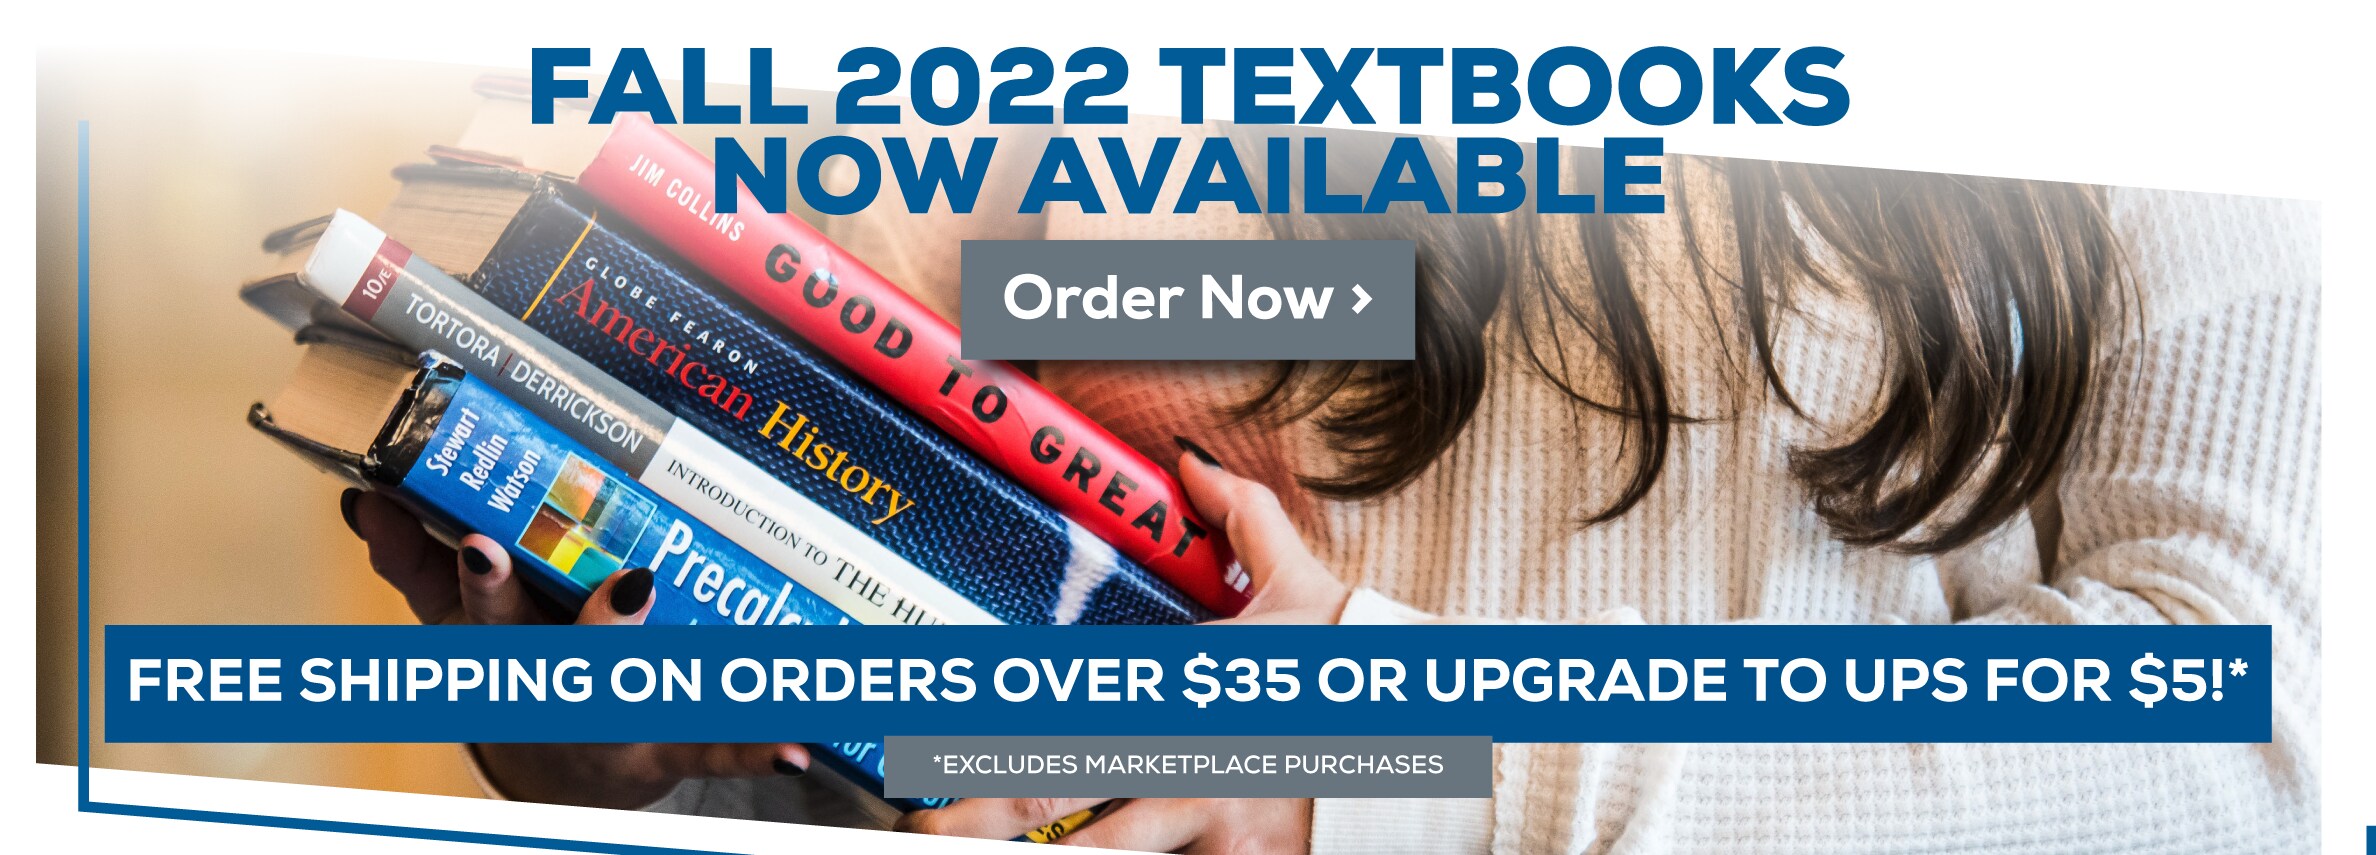 Fall 2022 Textbooks now available. Order now. Free shipping on orders over $35! upgrade to UPS for $5! *Excludes marketplace purchases